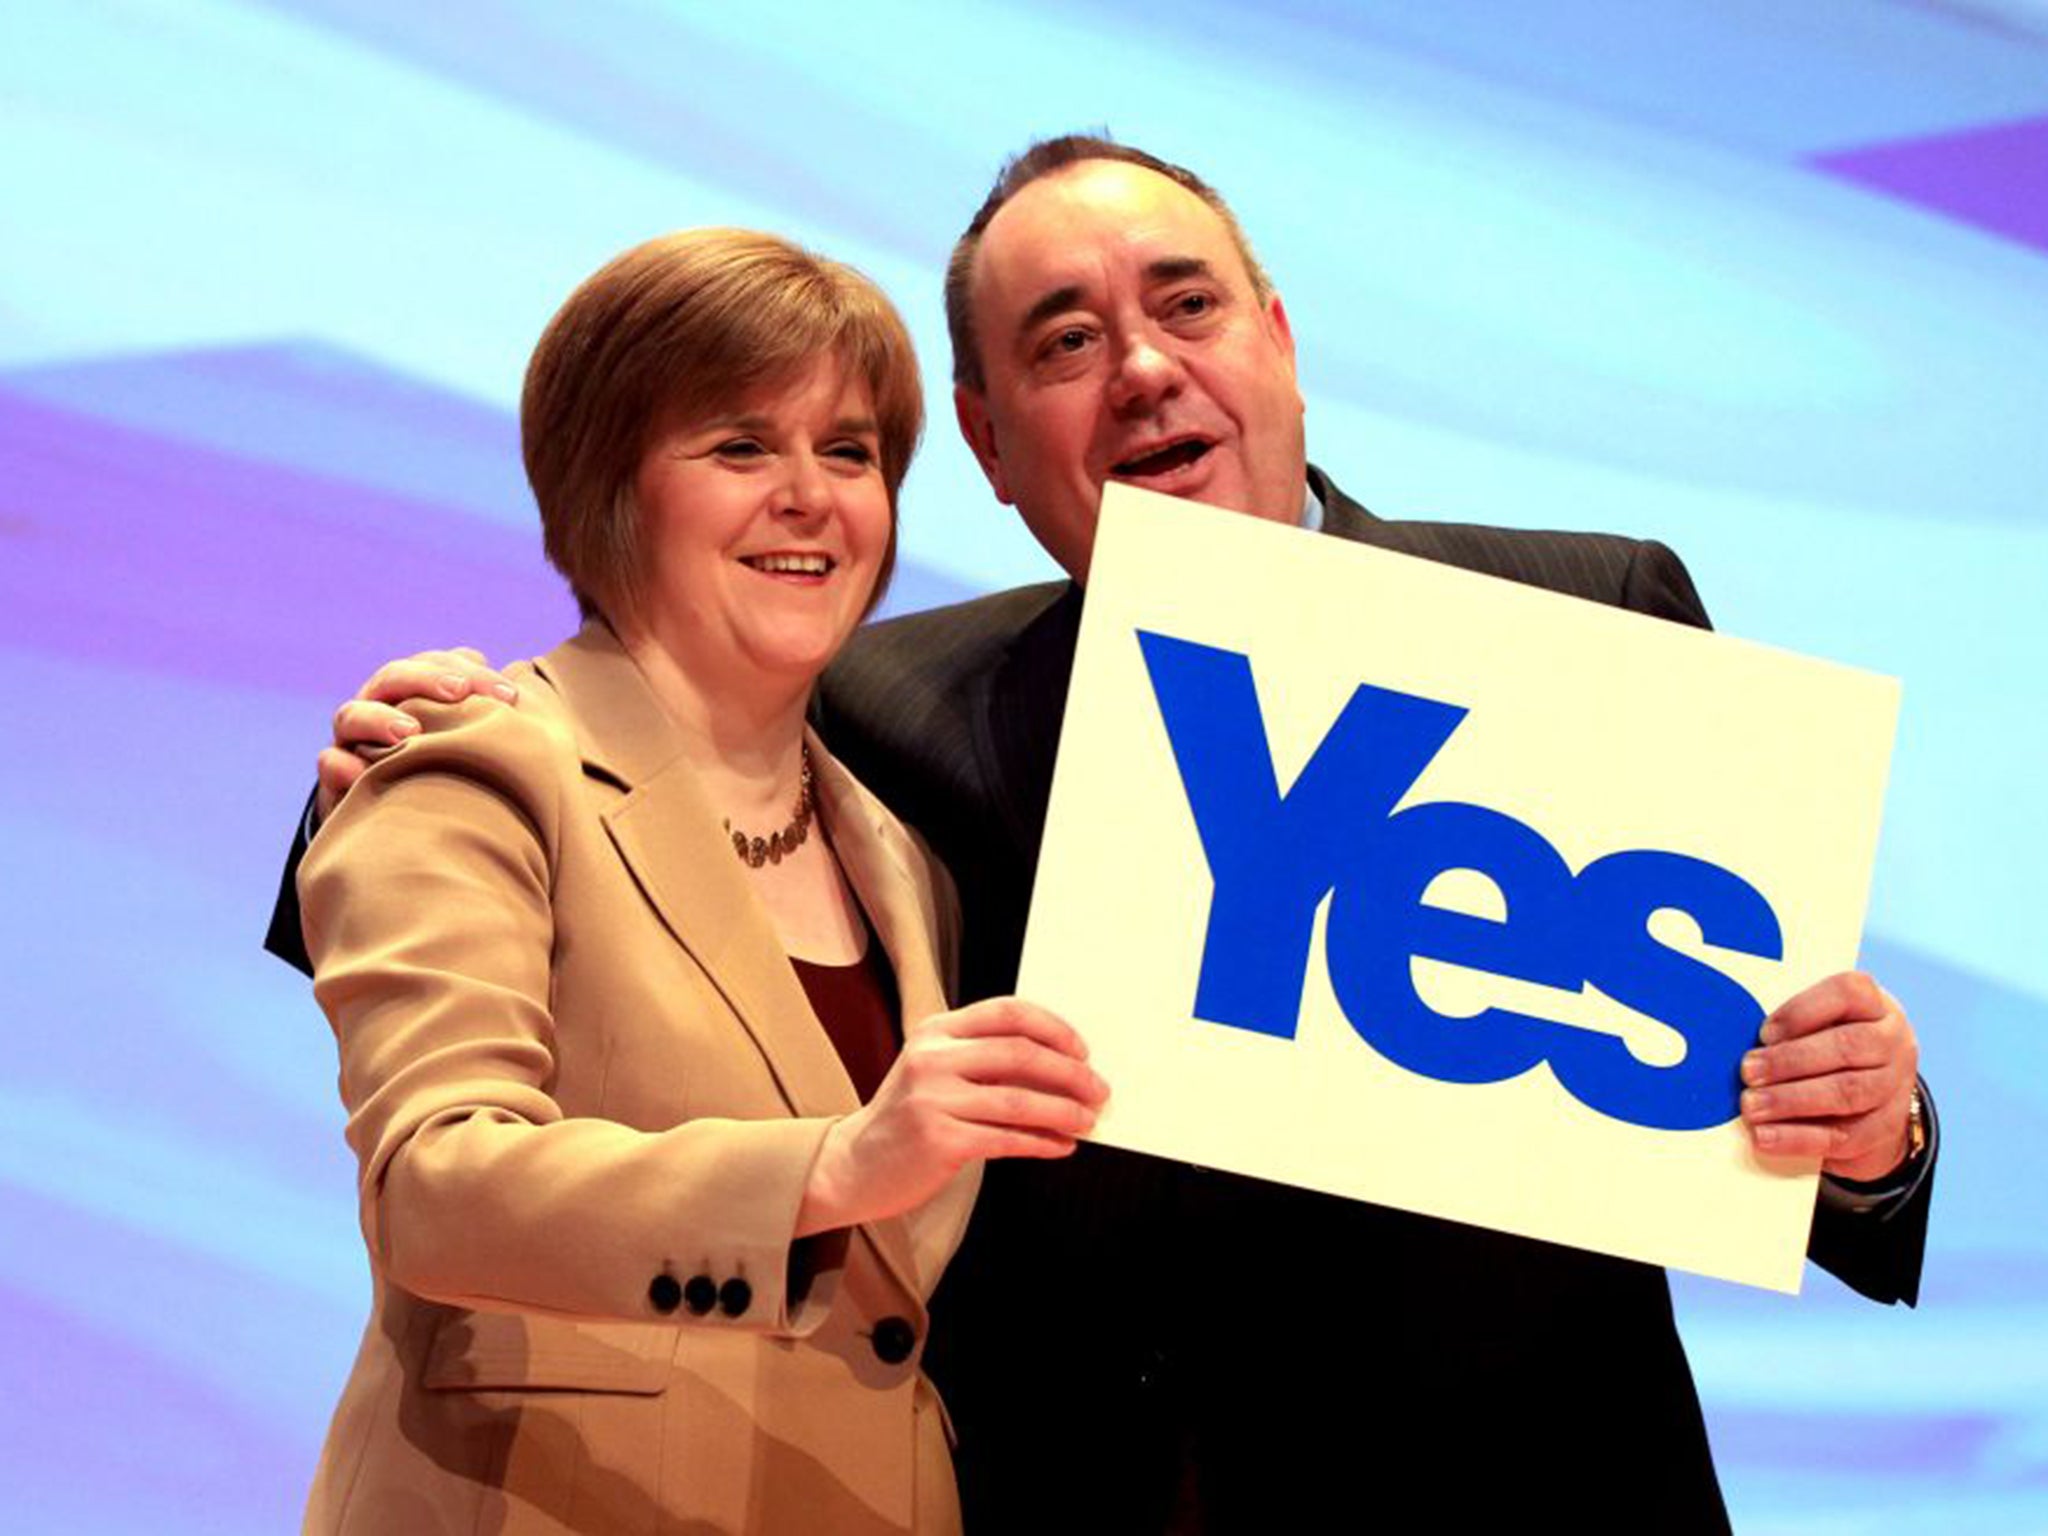 'Alex Salmond, the former SNP leader, has suggested that a second referendum would be held within two years of a Brexit vote and that Scots would vote Yes'